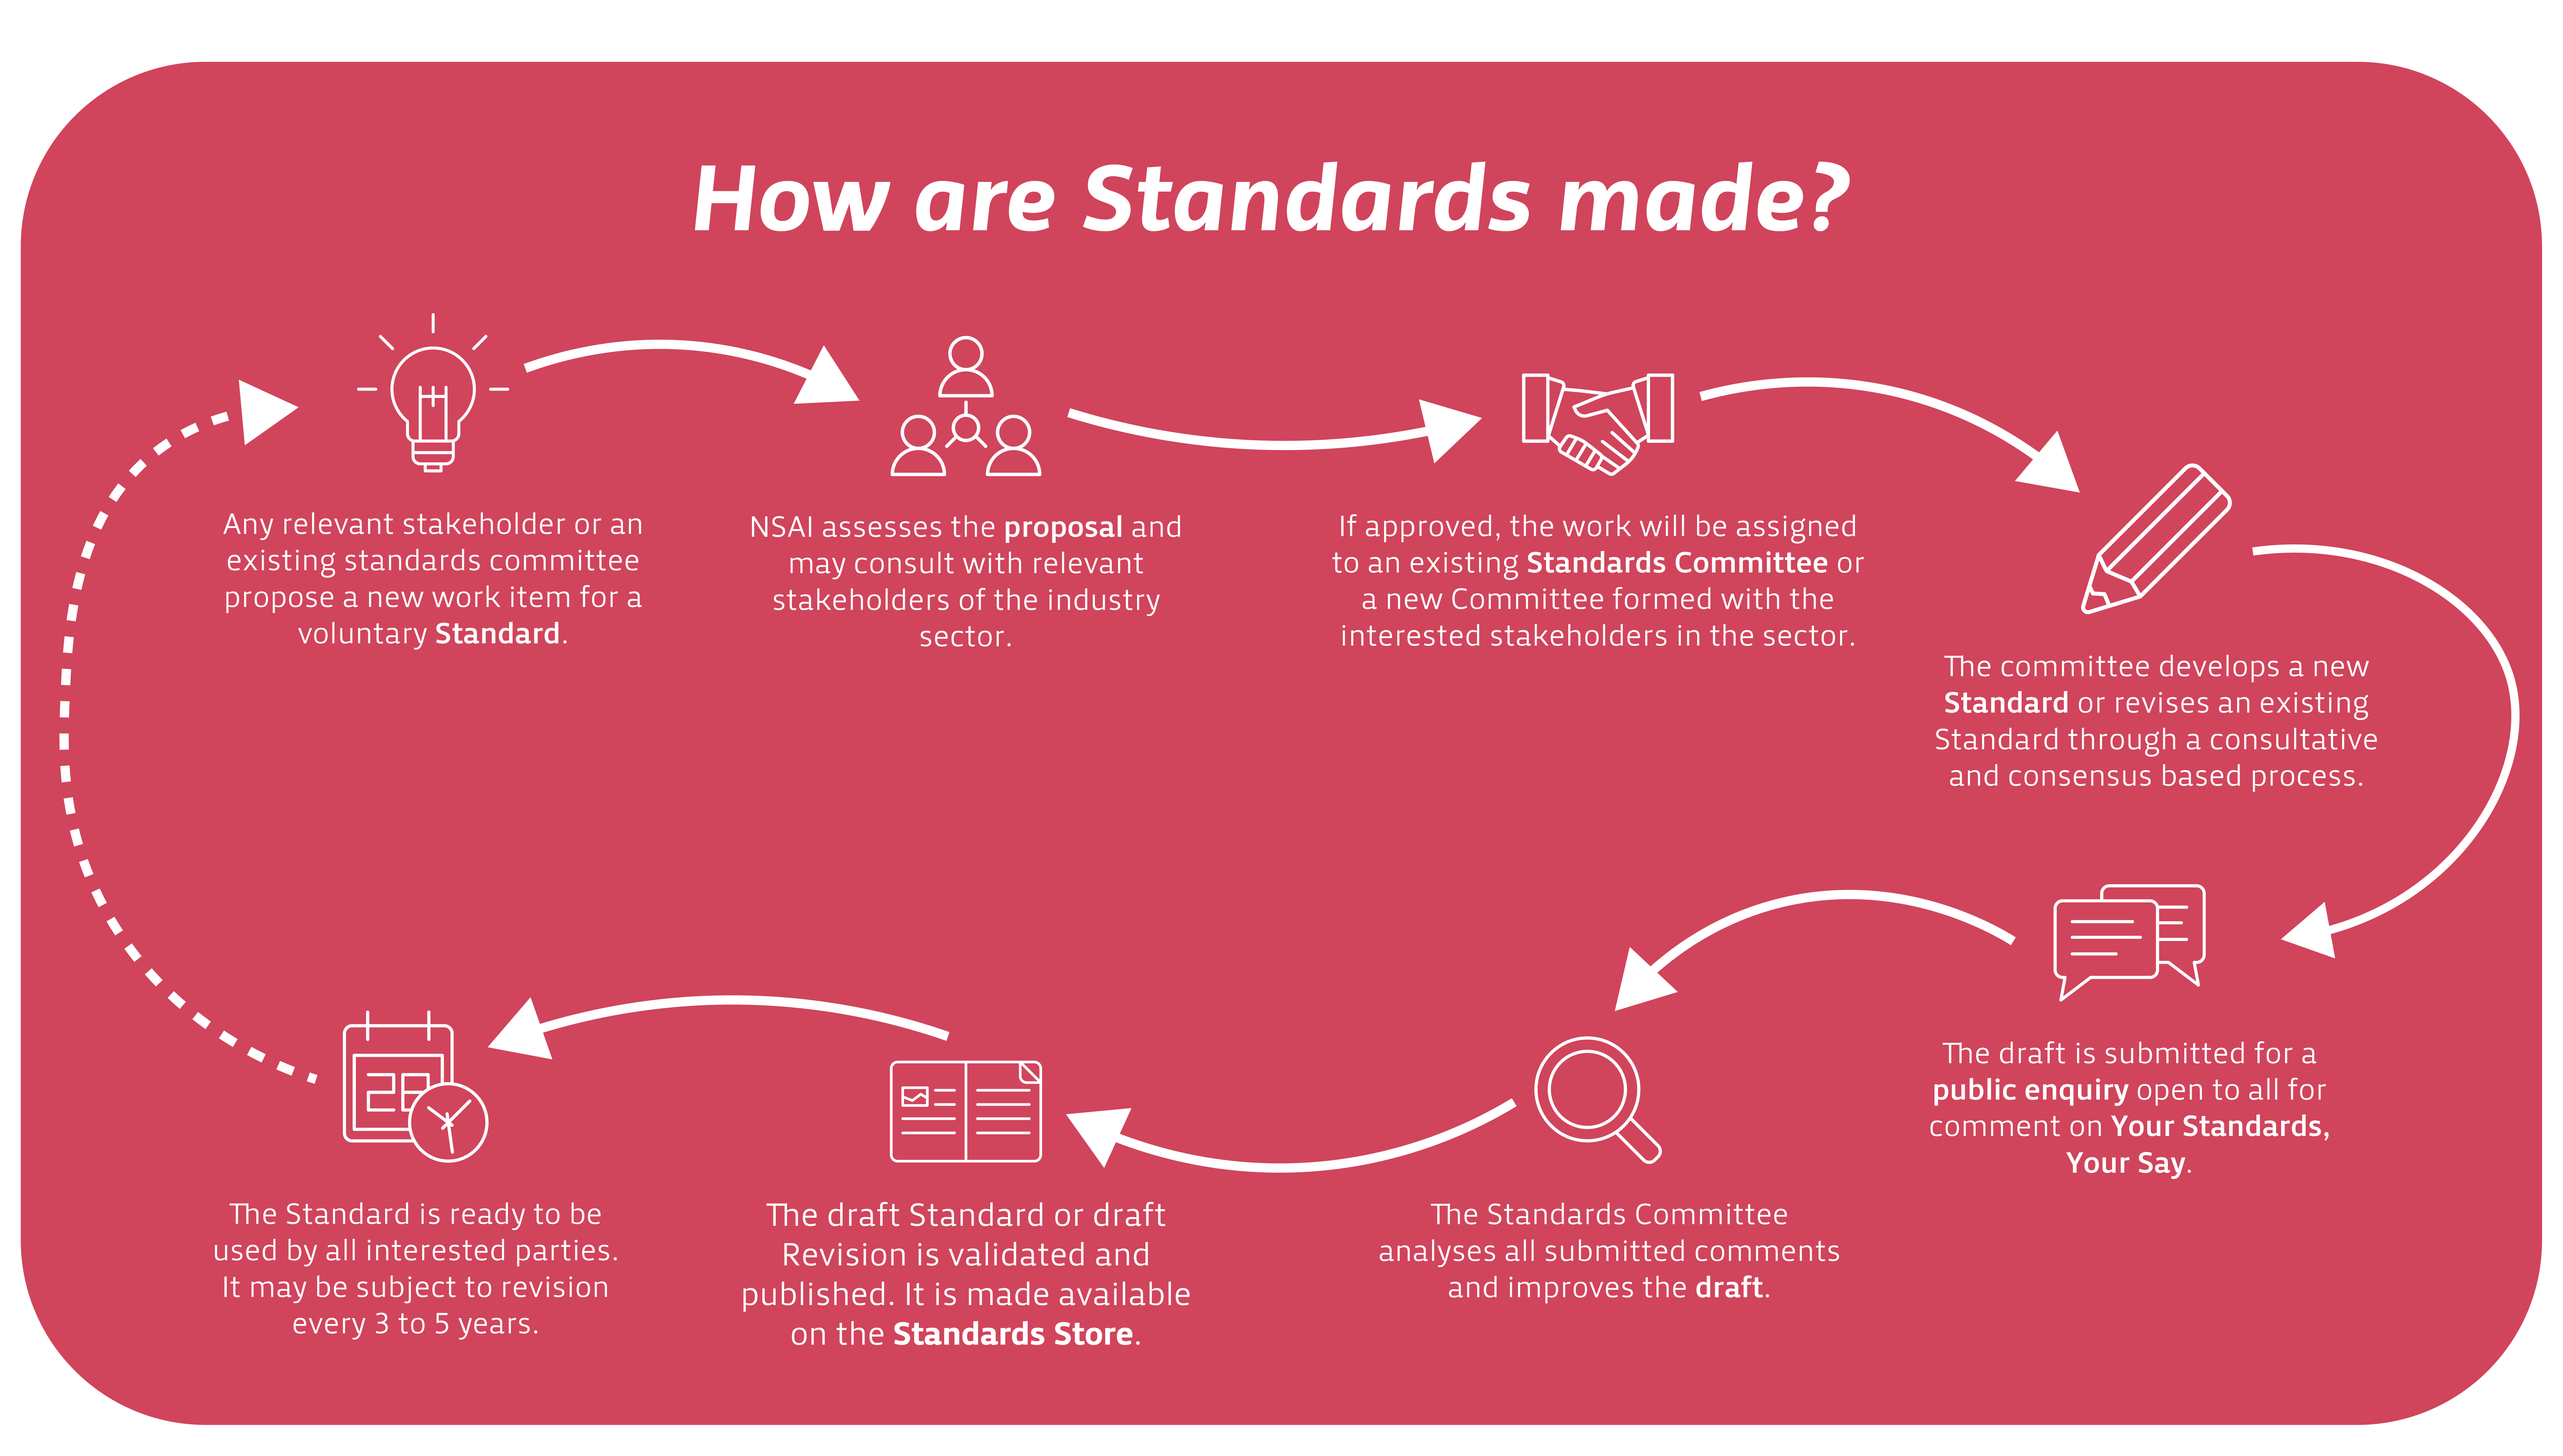 An image detailing the standards process